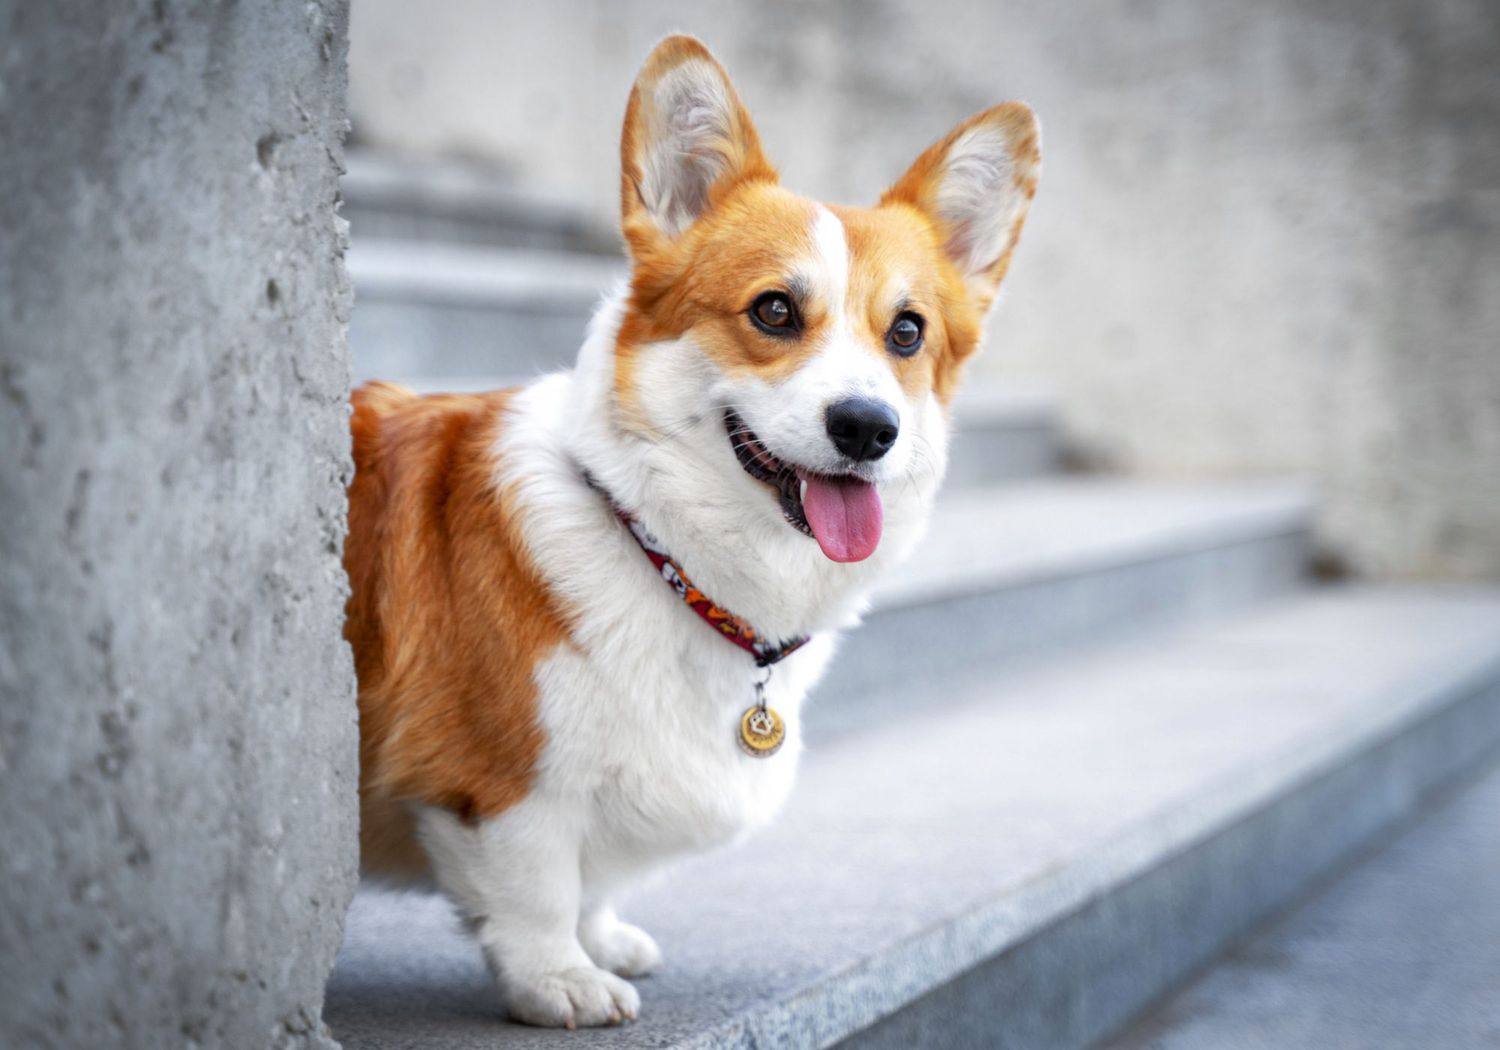 Boy Dog Names: 260 Names for Male Dogs | Daily Paws